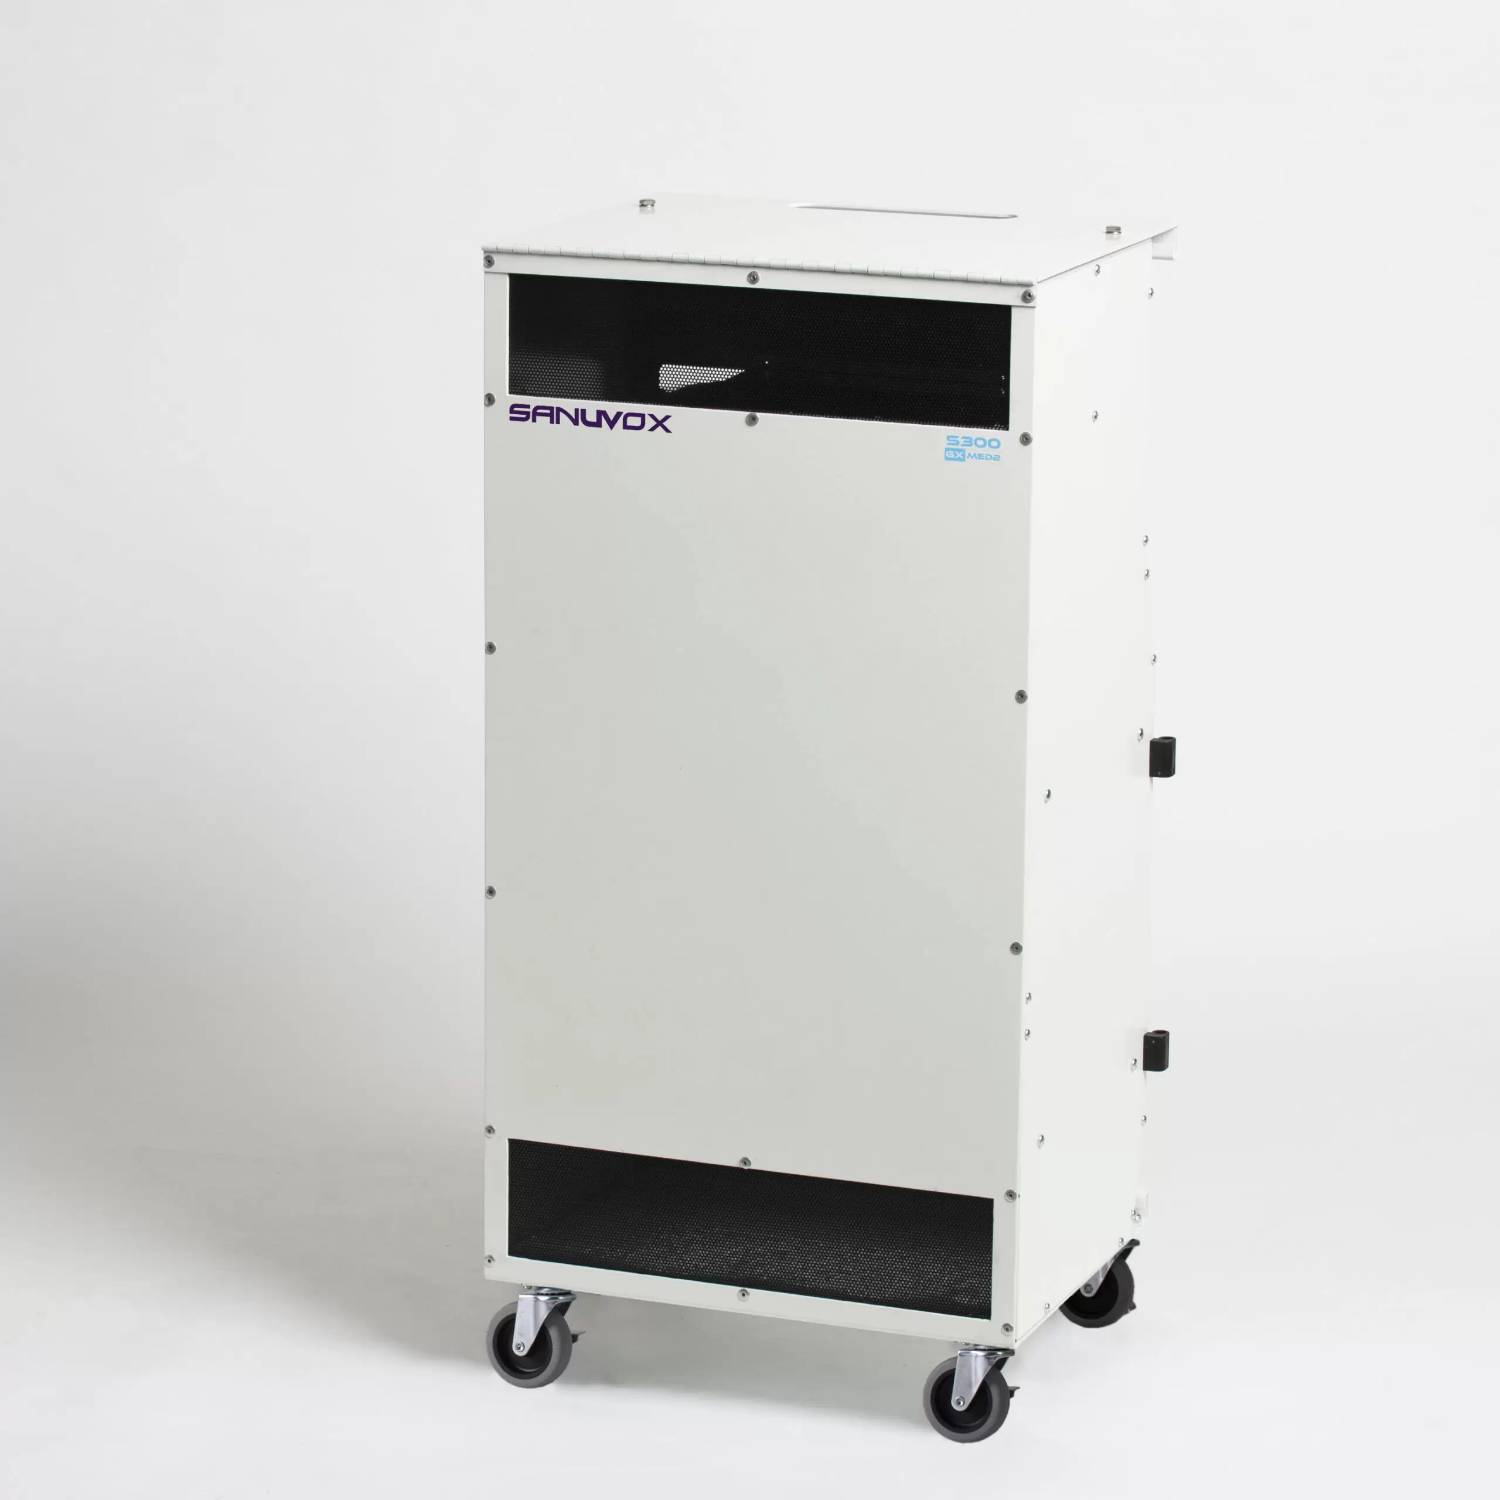 Sanuvair S300-MED2 - Standalone UVC air disinfection unit